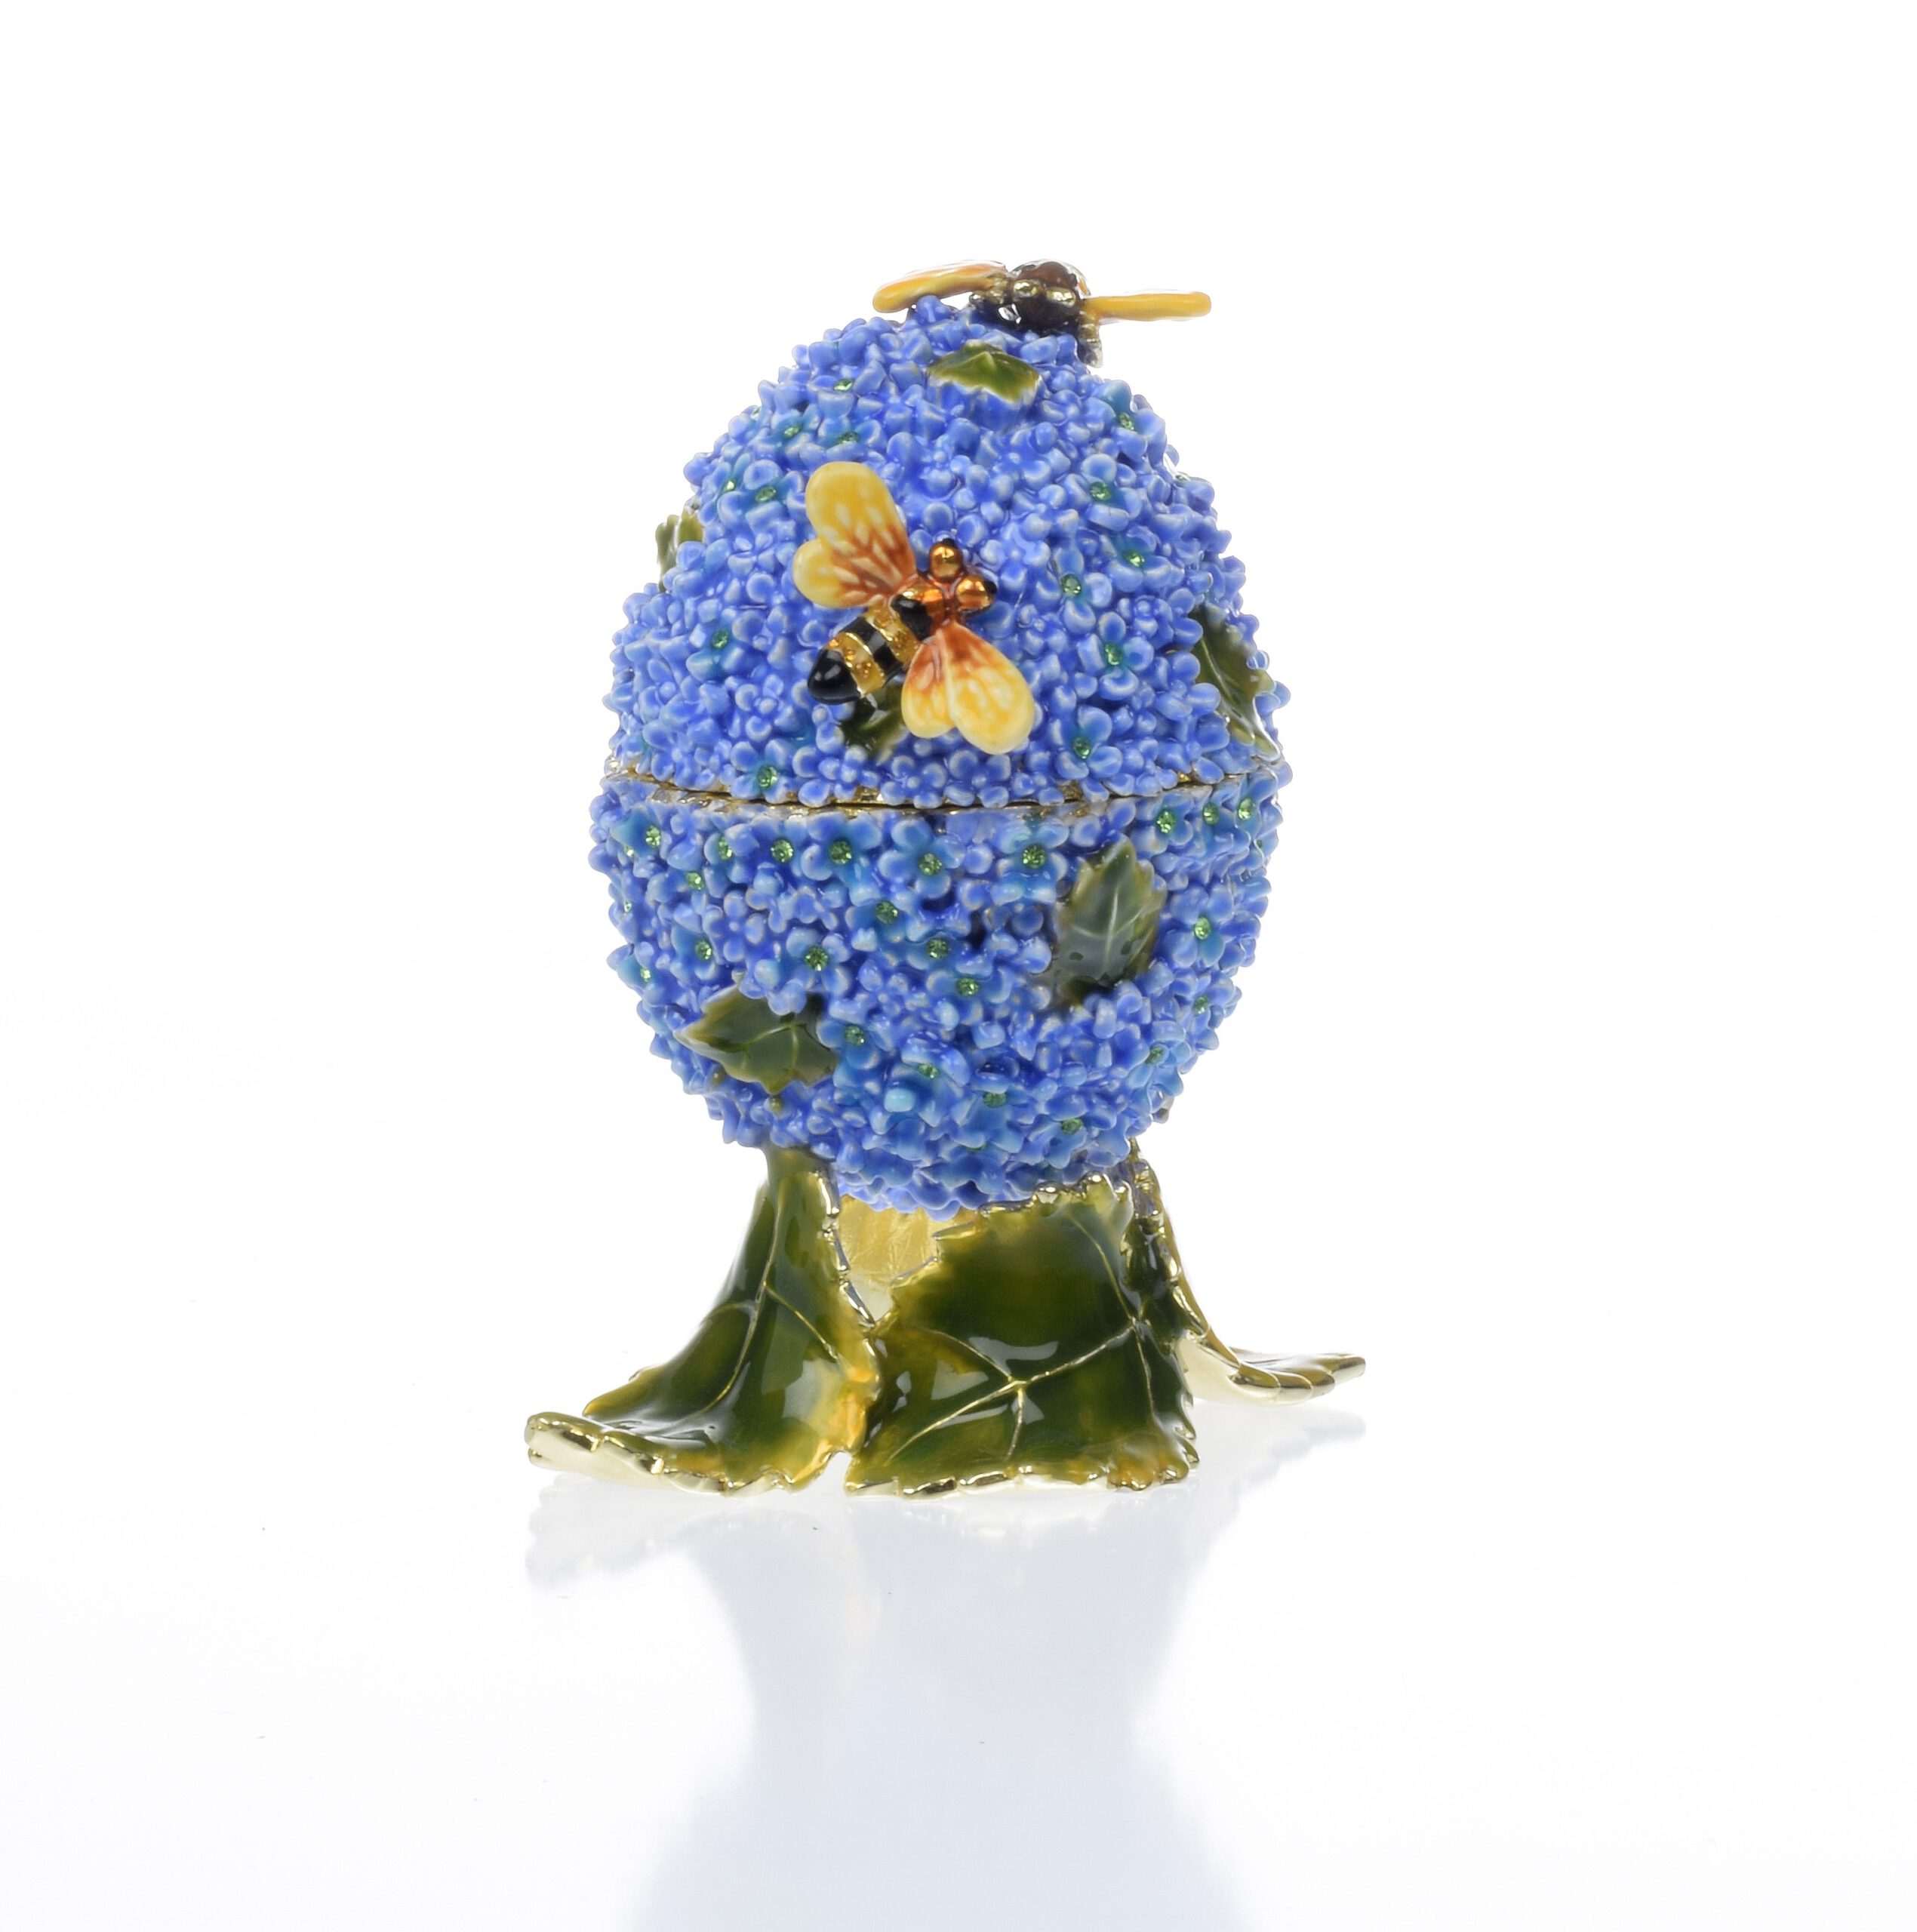 Blue Musical Egg with Bees